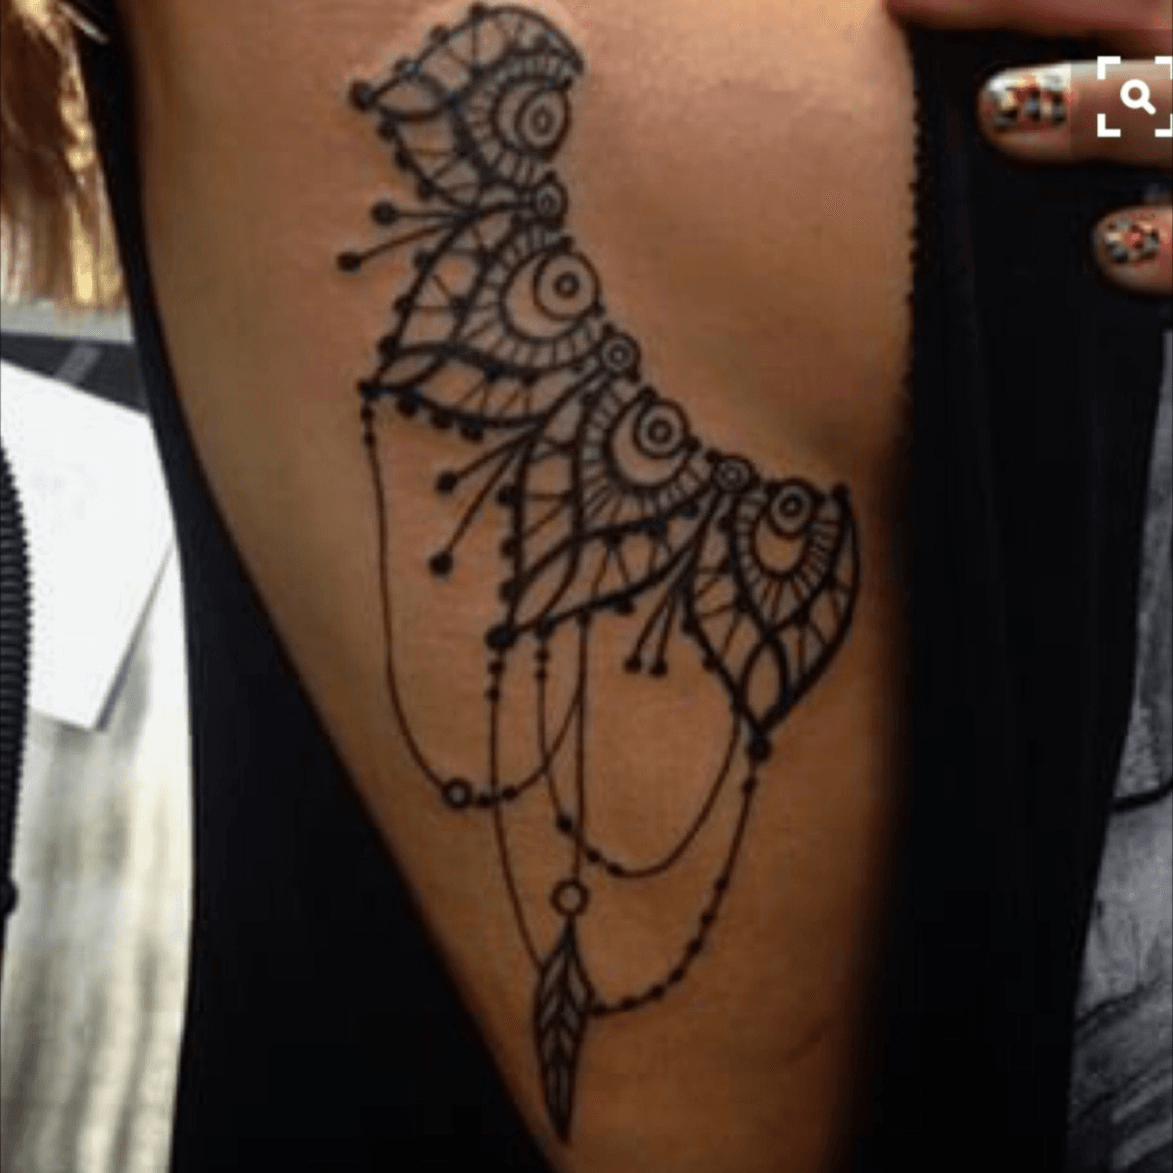 Side and under boob tattoos are all the rage